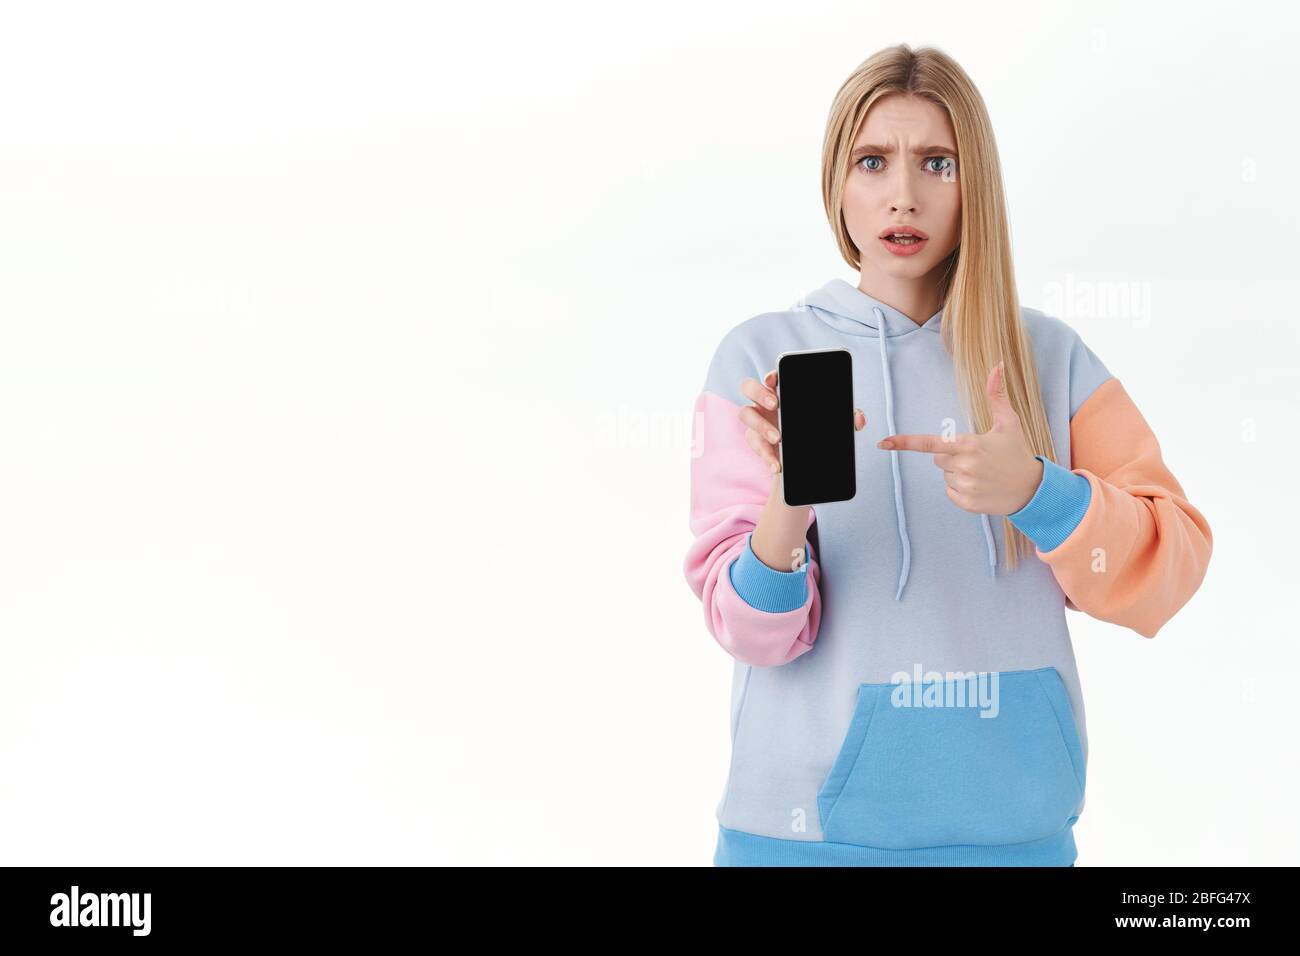 Communication, smartphone and promo concept. Portrait of frustrated blond girl being confused with strange bad news on media, pointing at mobile phone Stock Photo